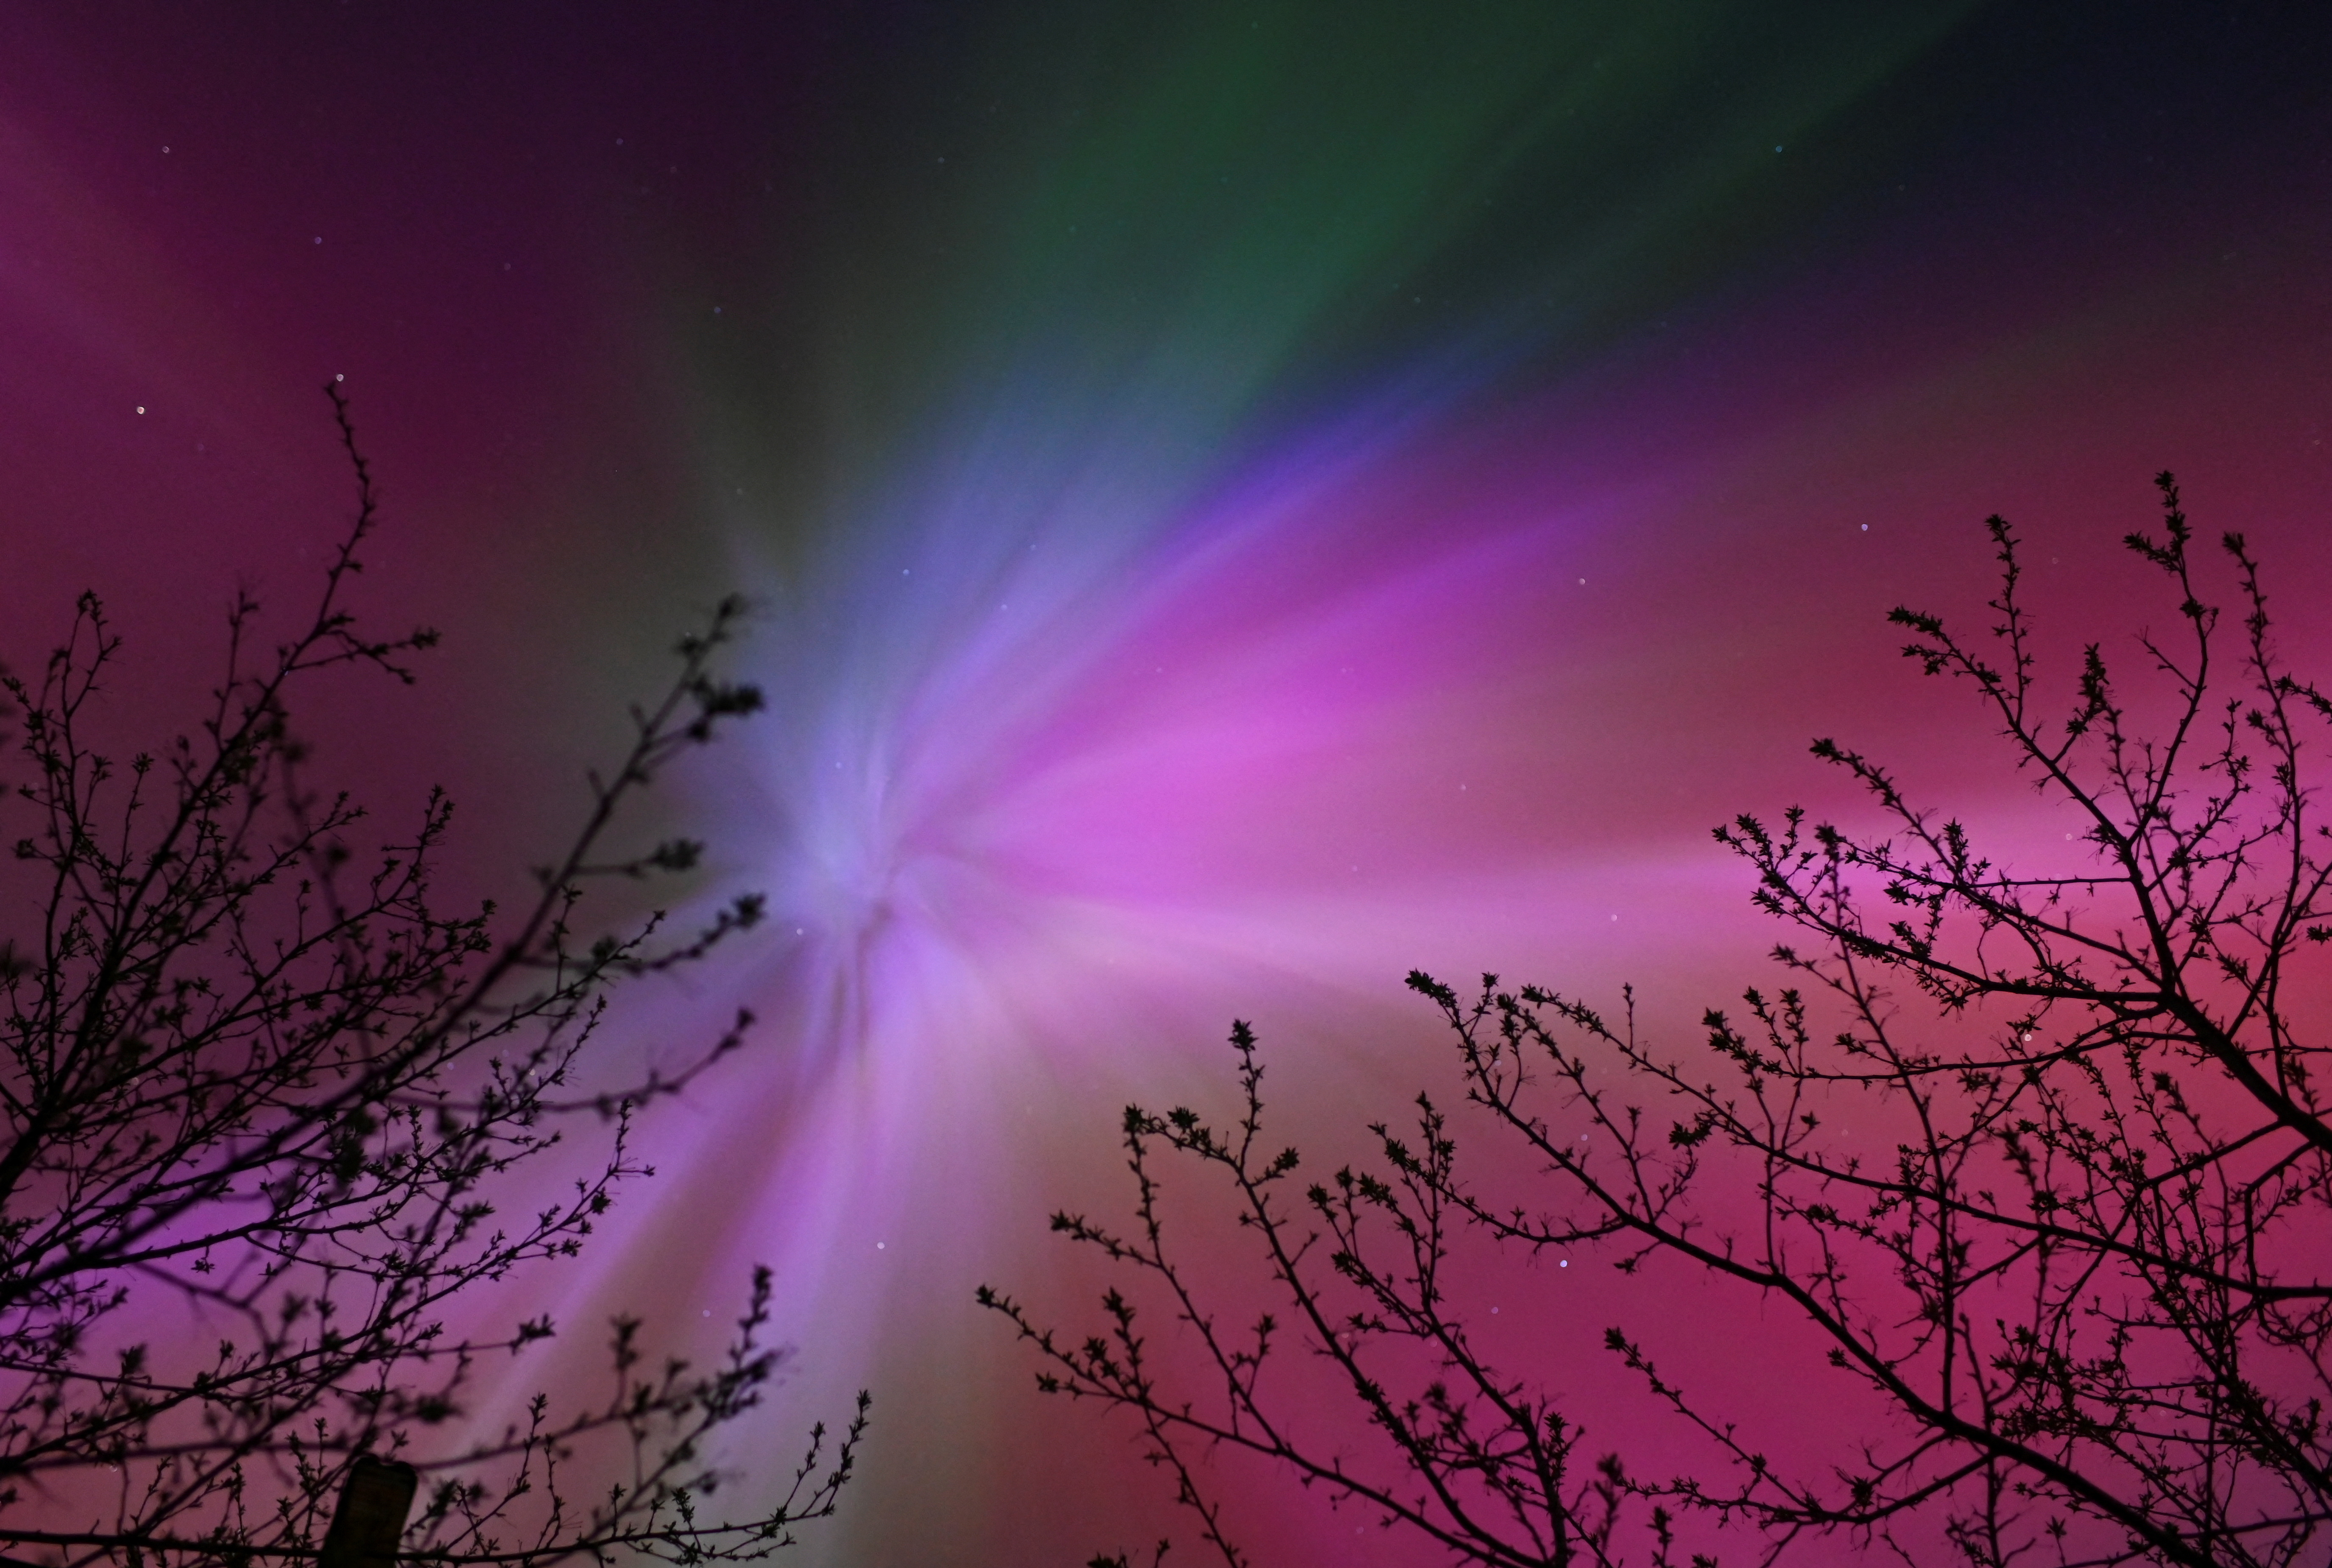 Auroras, caused by a coronal mass ejection on the Sun, illuminate the skies in Omsk region